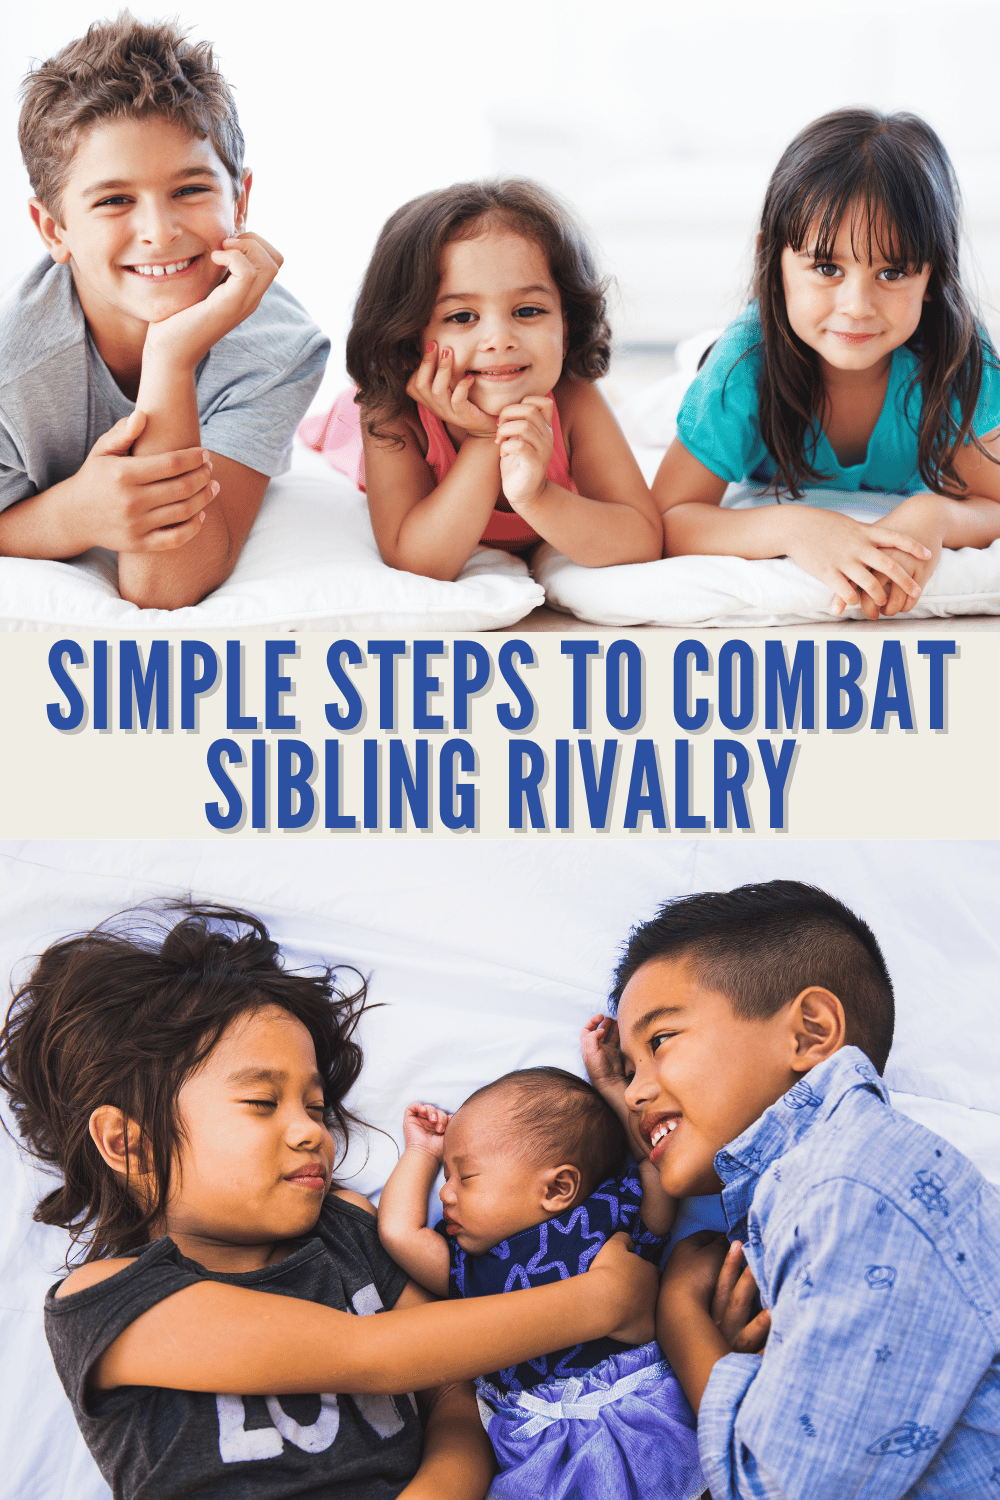 Having multiple children also means that there's a good chance that sibling rivalry may exist. If it does, here are some simple steps to help combat it! #siblingrivalry #family #parenting #parentingtips via @wondermomwannab